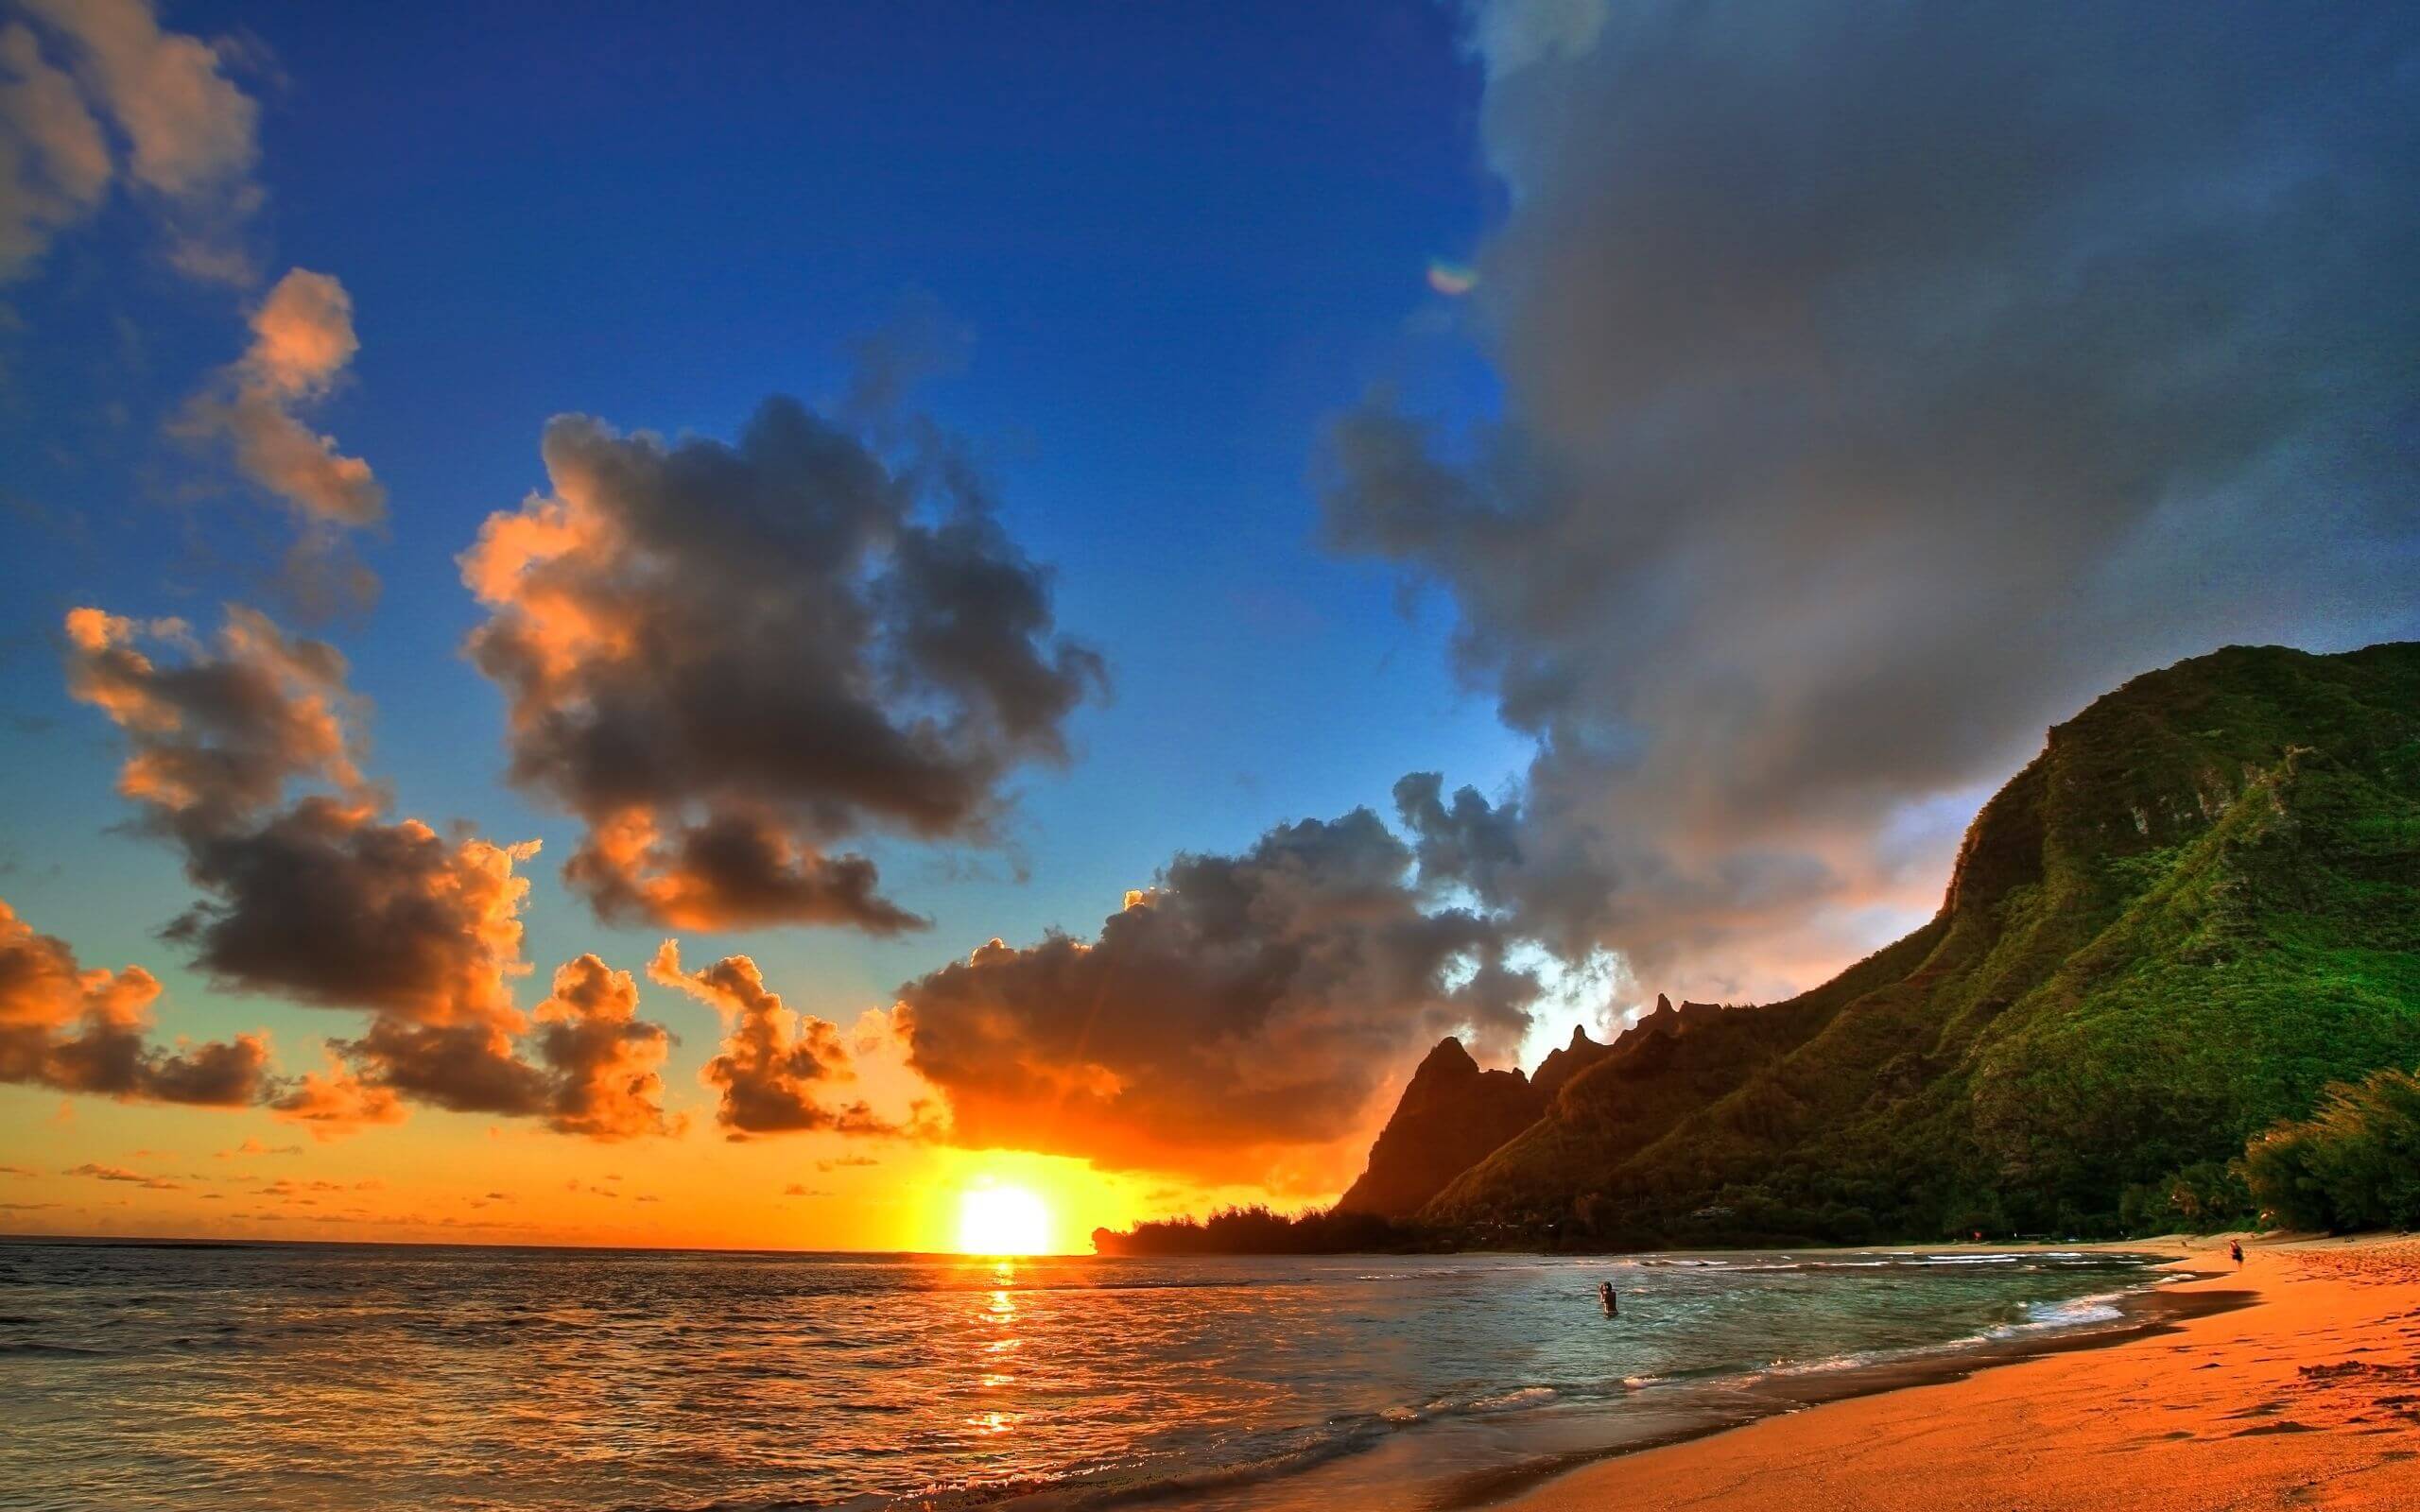 Here Are 10 Stunning Hawaii Sunsets Photos That Will Leave You in Awe